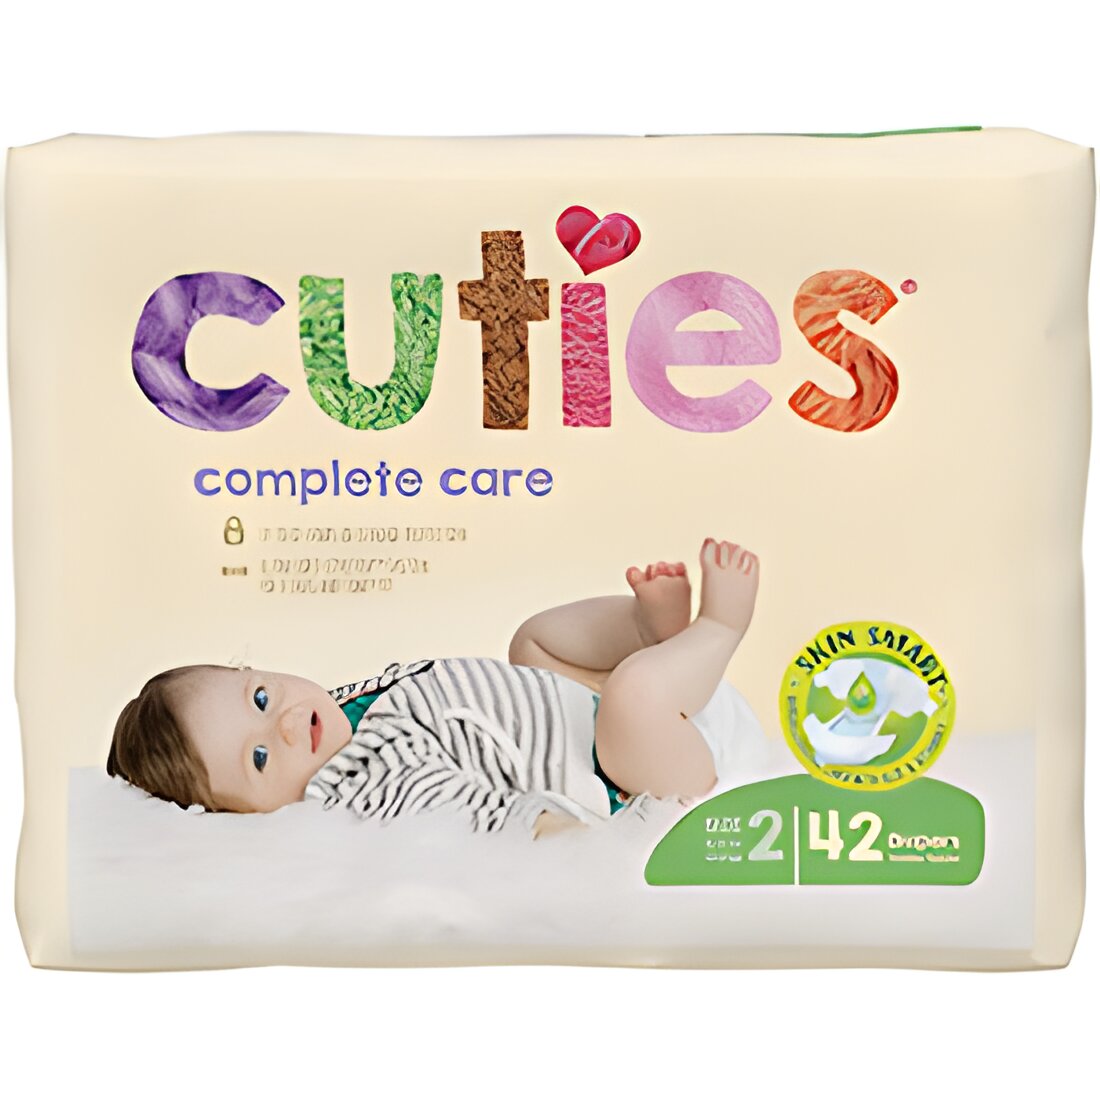 Free Cuties Complete Care Baby Diapers